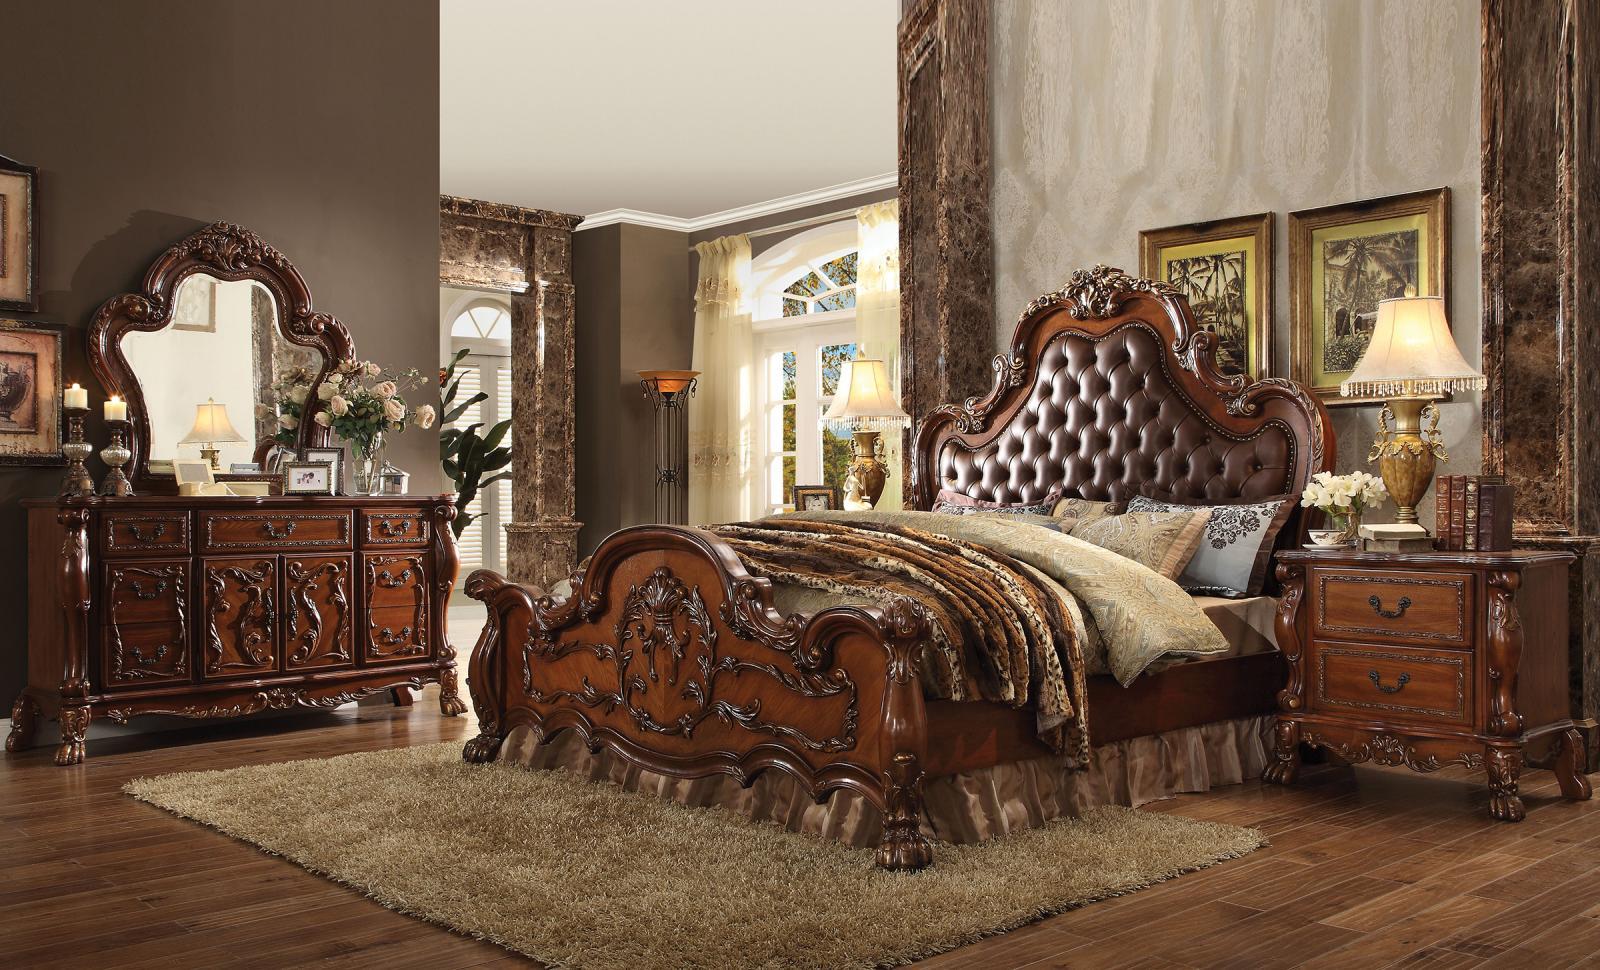 

    
Luxury Tufted PU Cherry Oak Perales Queen Bedroom Set 3 Traditional Carved Wood
